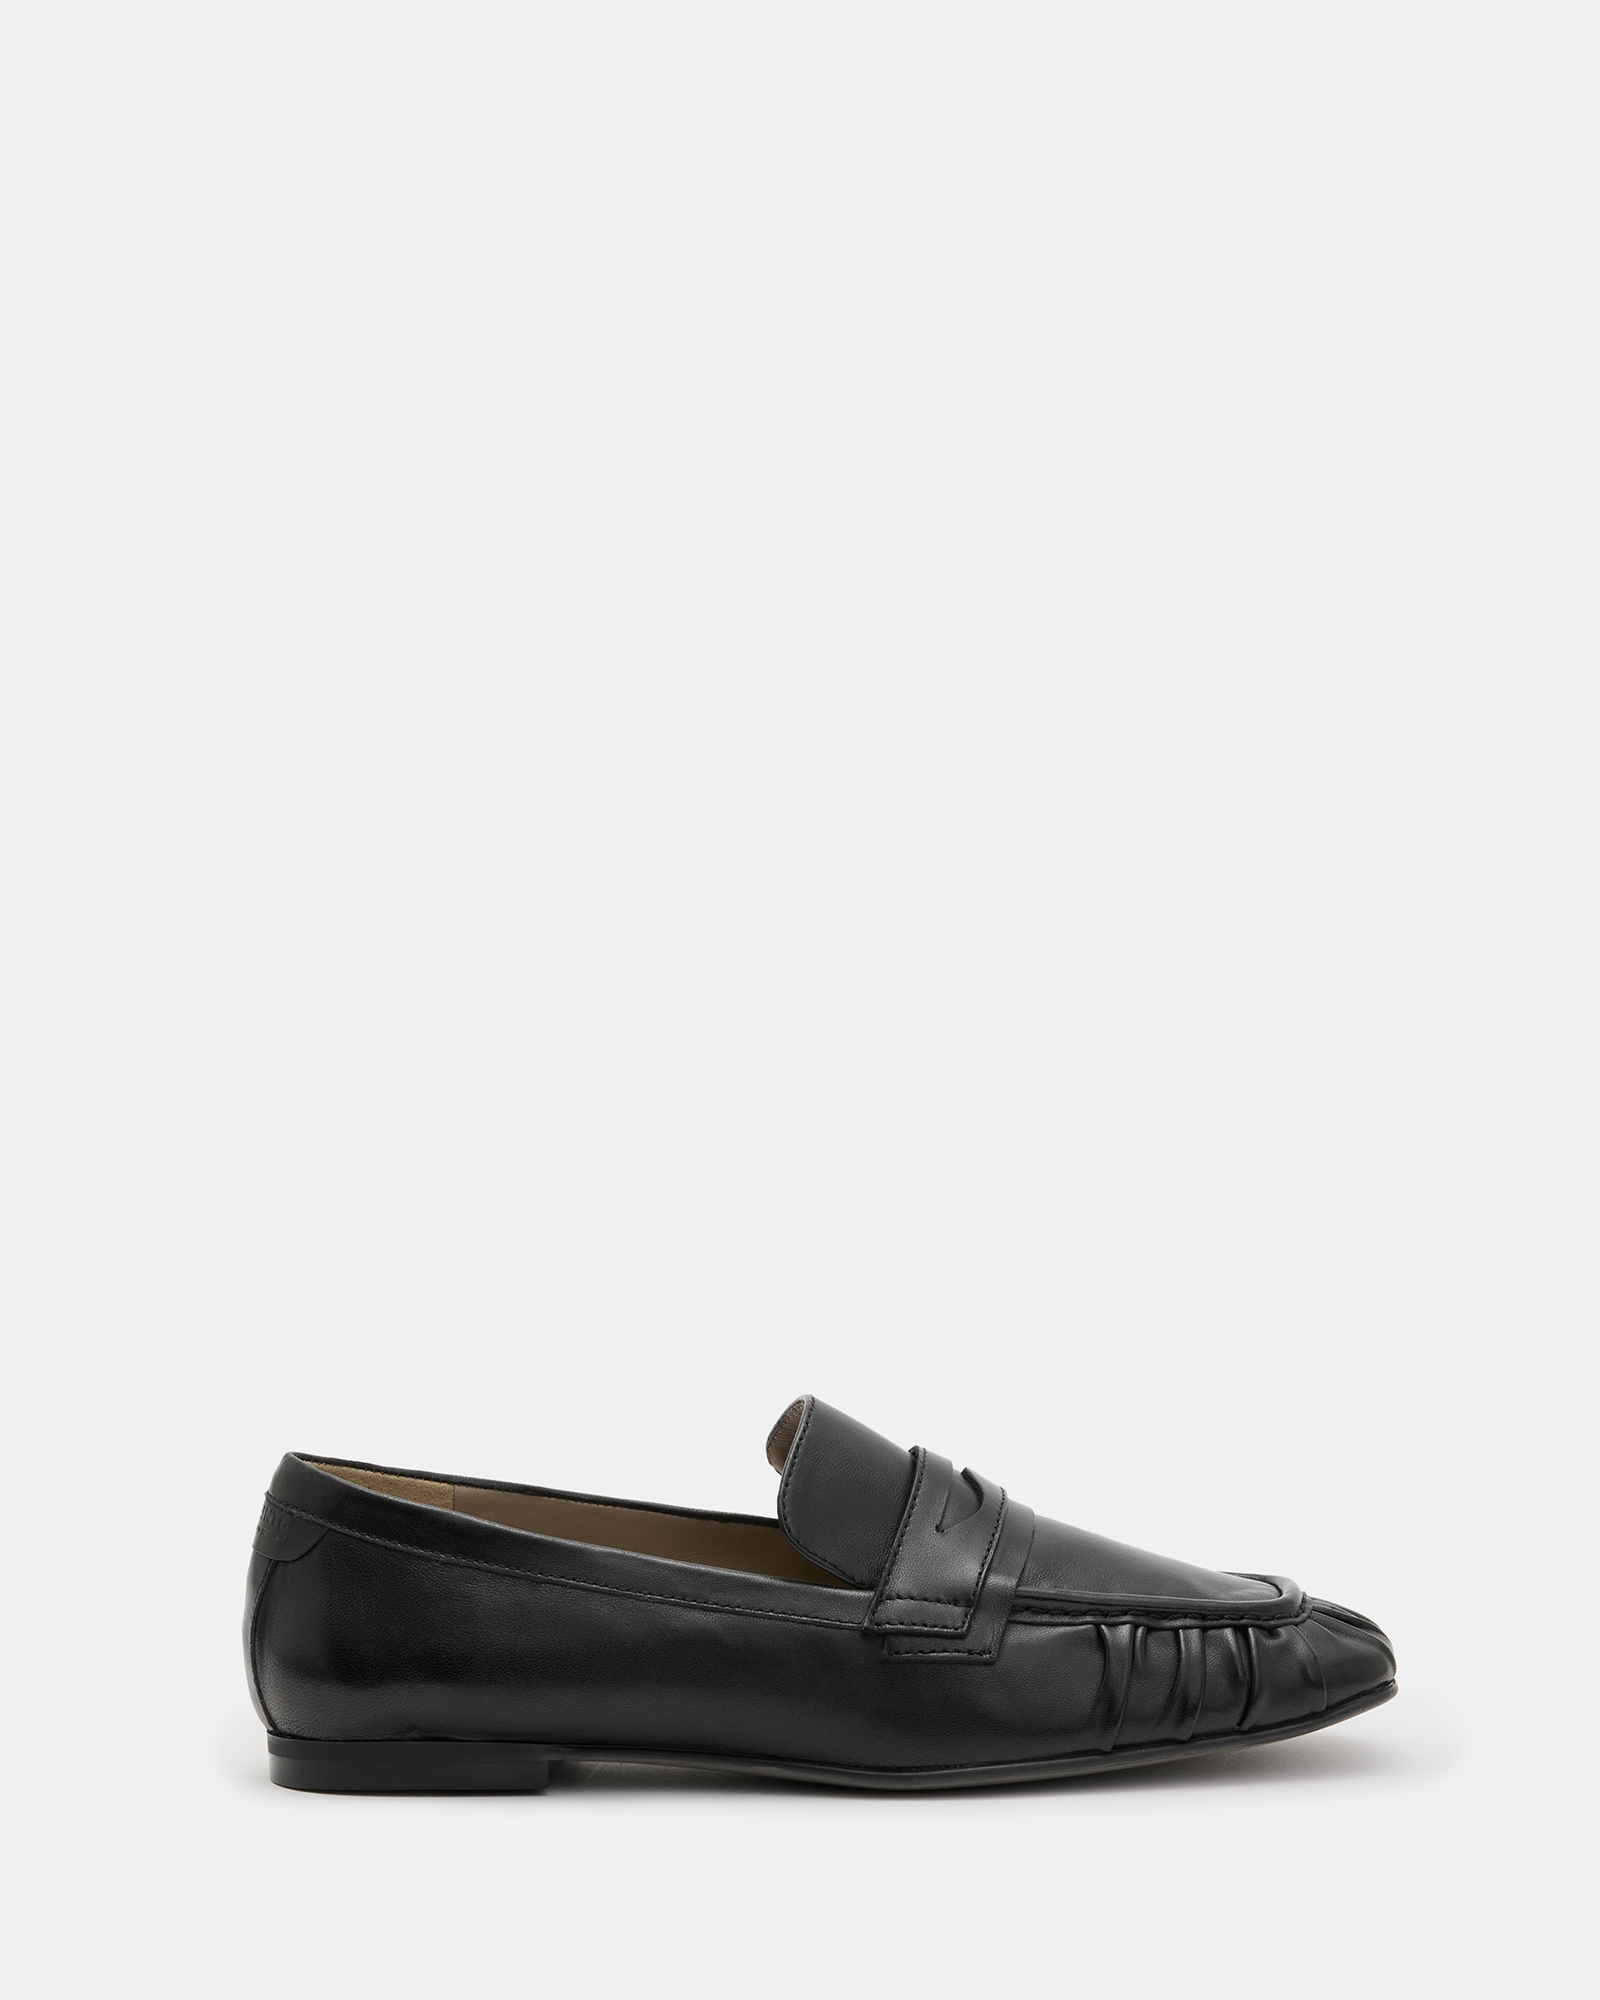 AllSaints Sapphire Leather Loafer Shoes